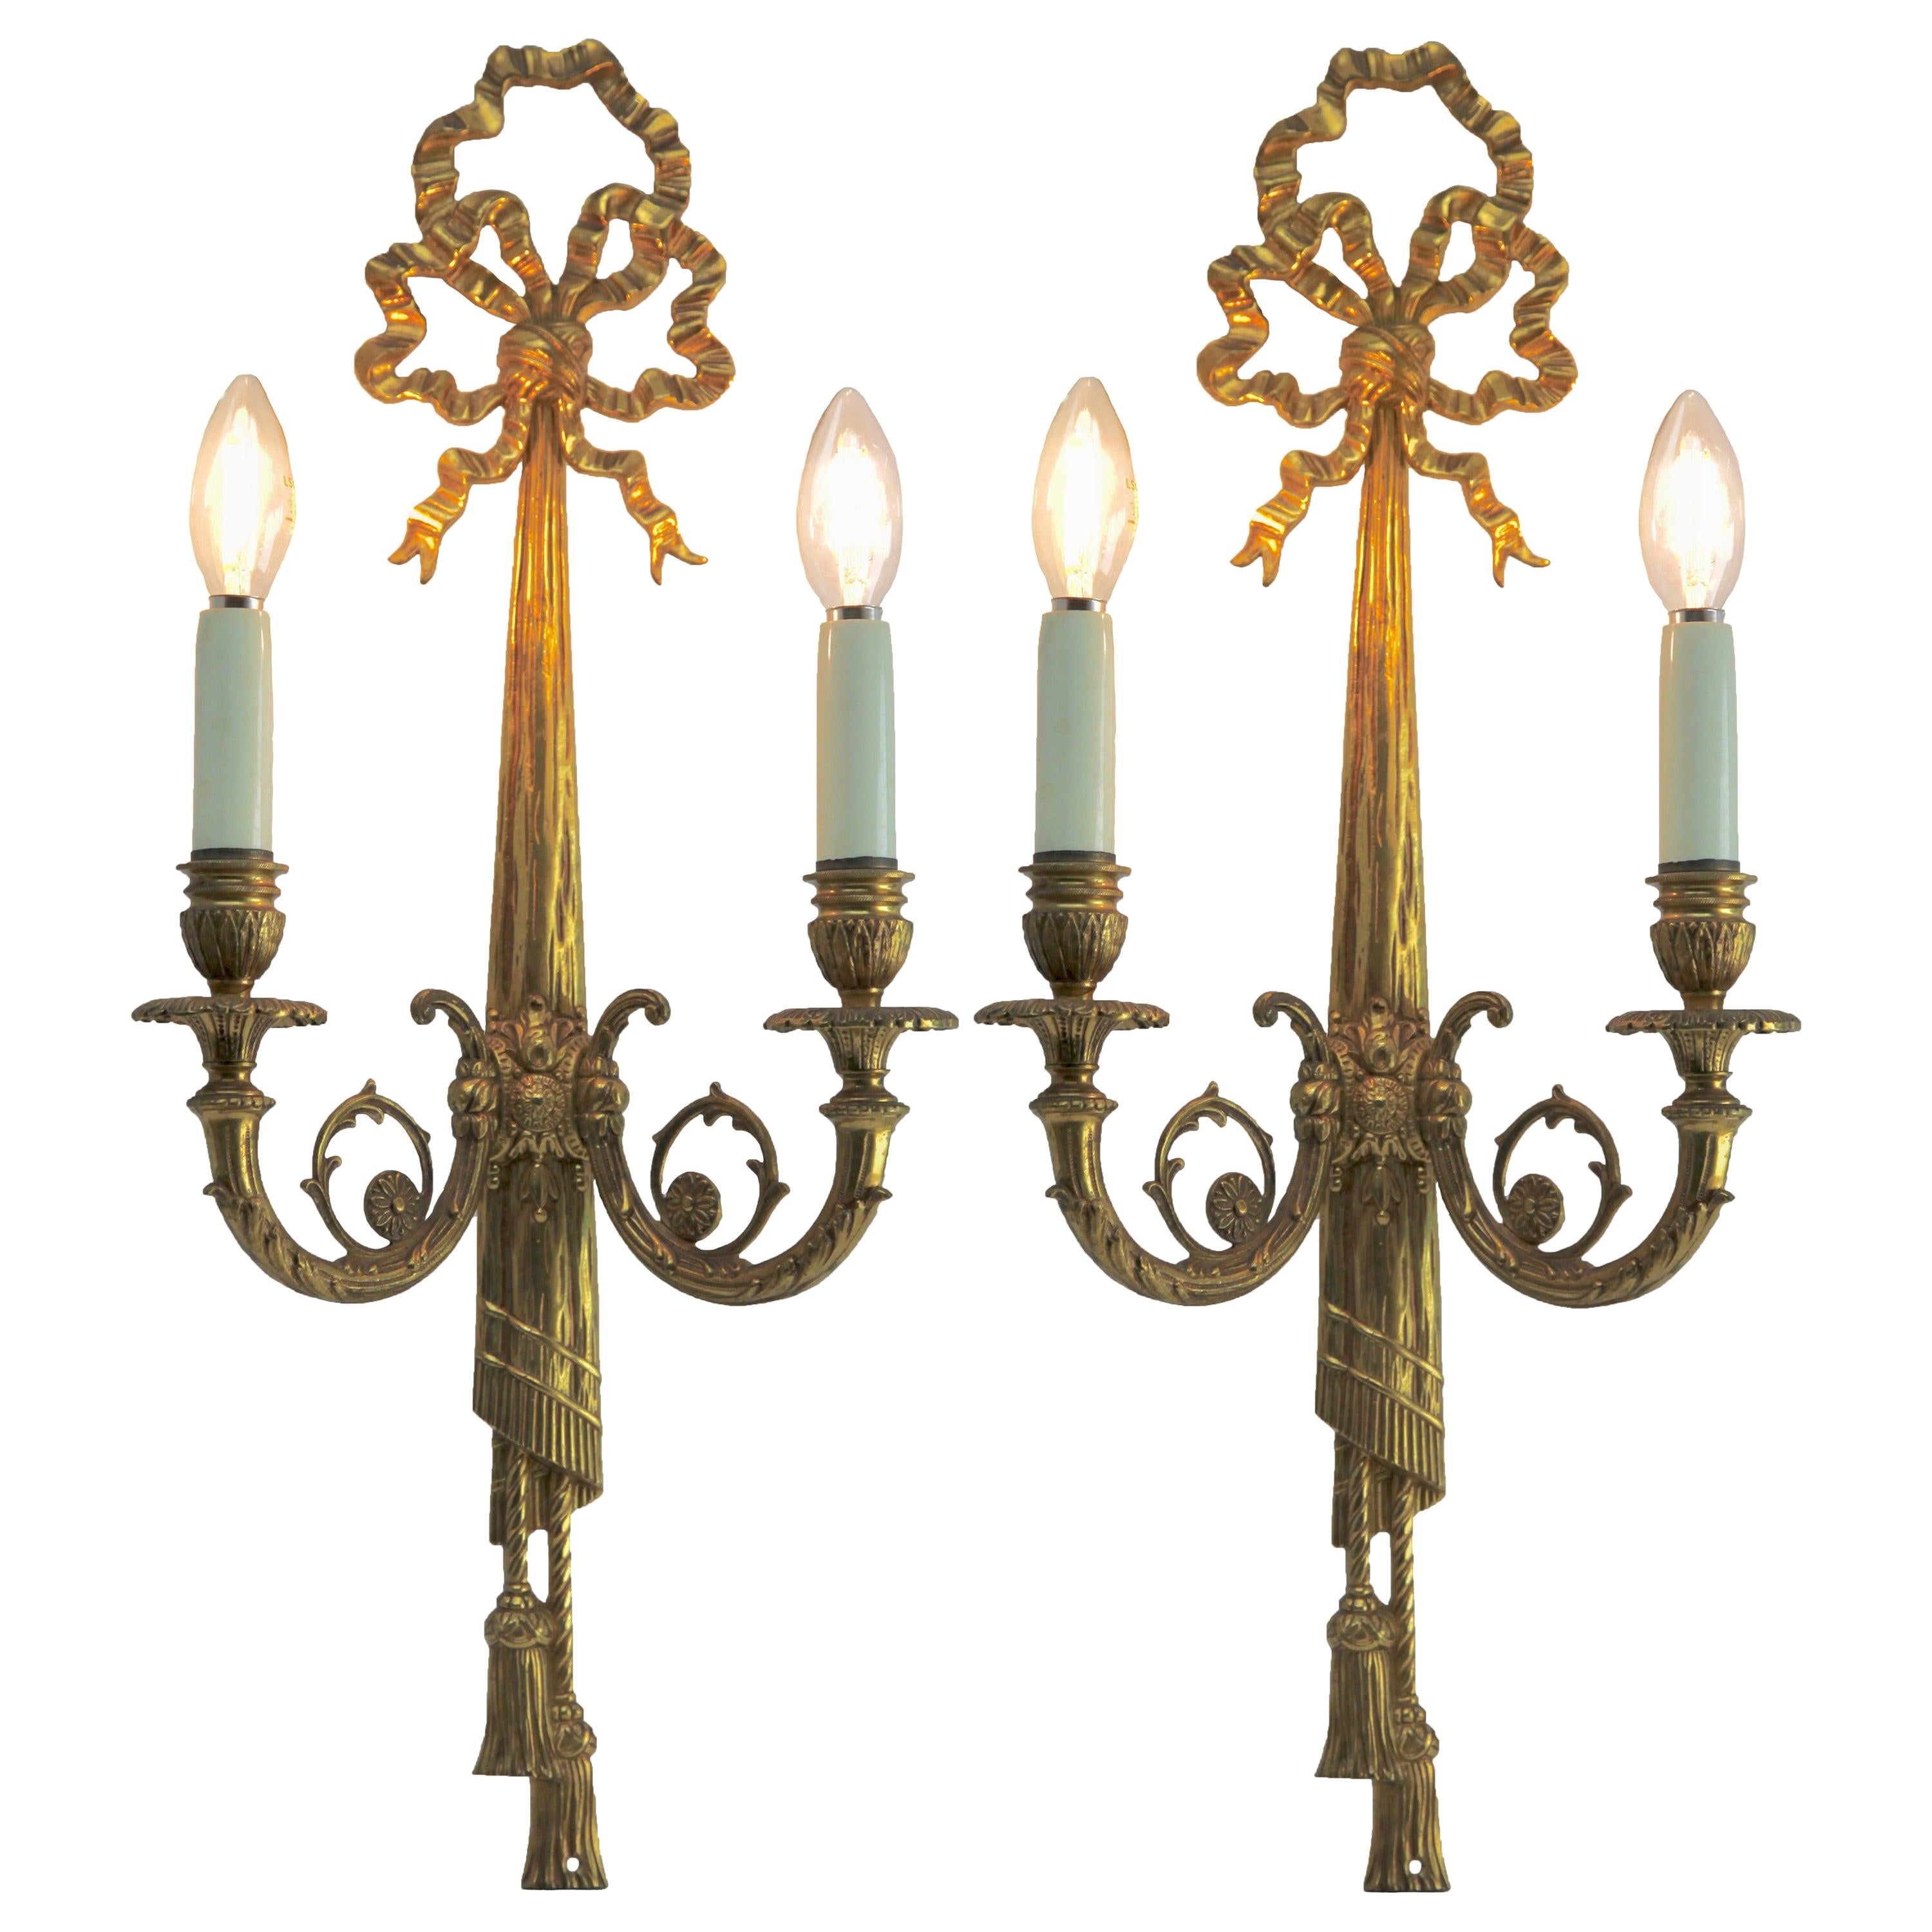 Pair of Brass Two-Light Sconces in Louis XVI Style